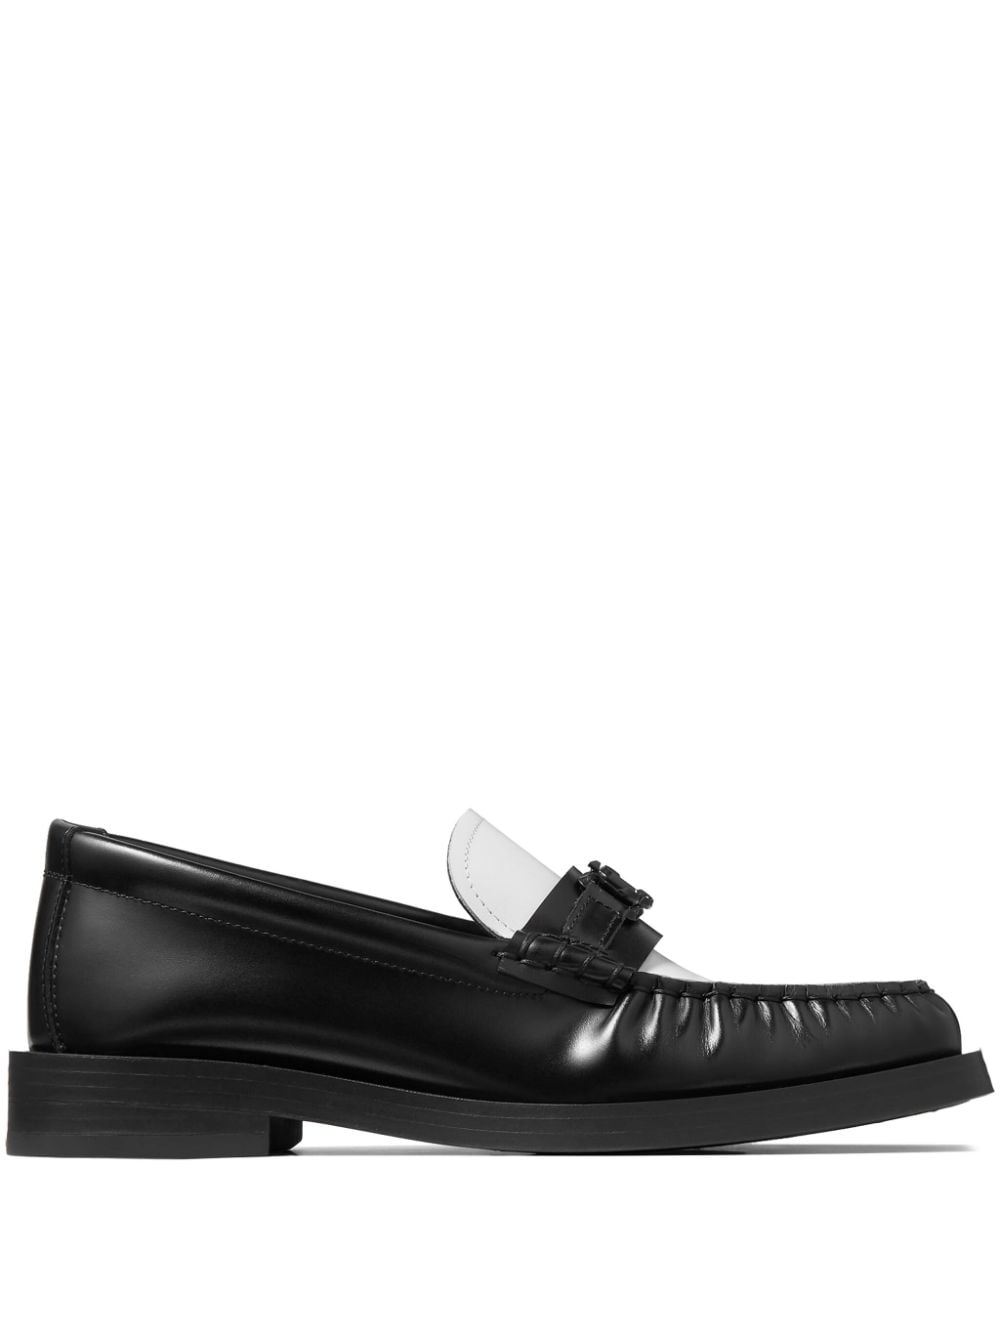 Image 1 of Jimmy Choo Addie logo-plaque leather loafers